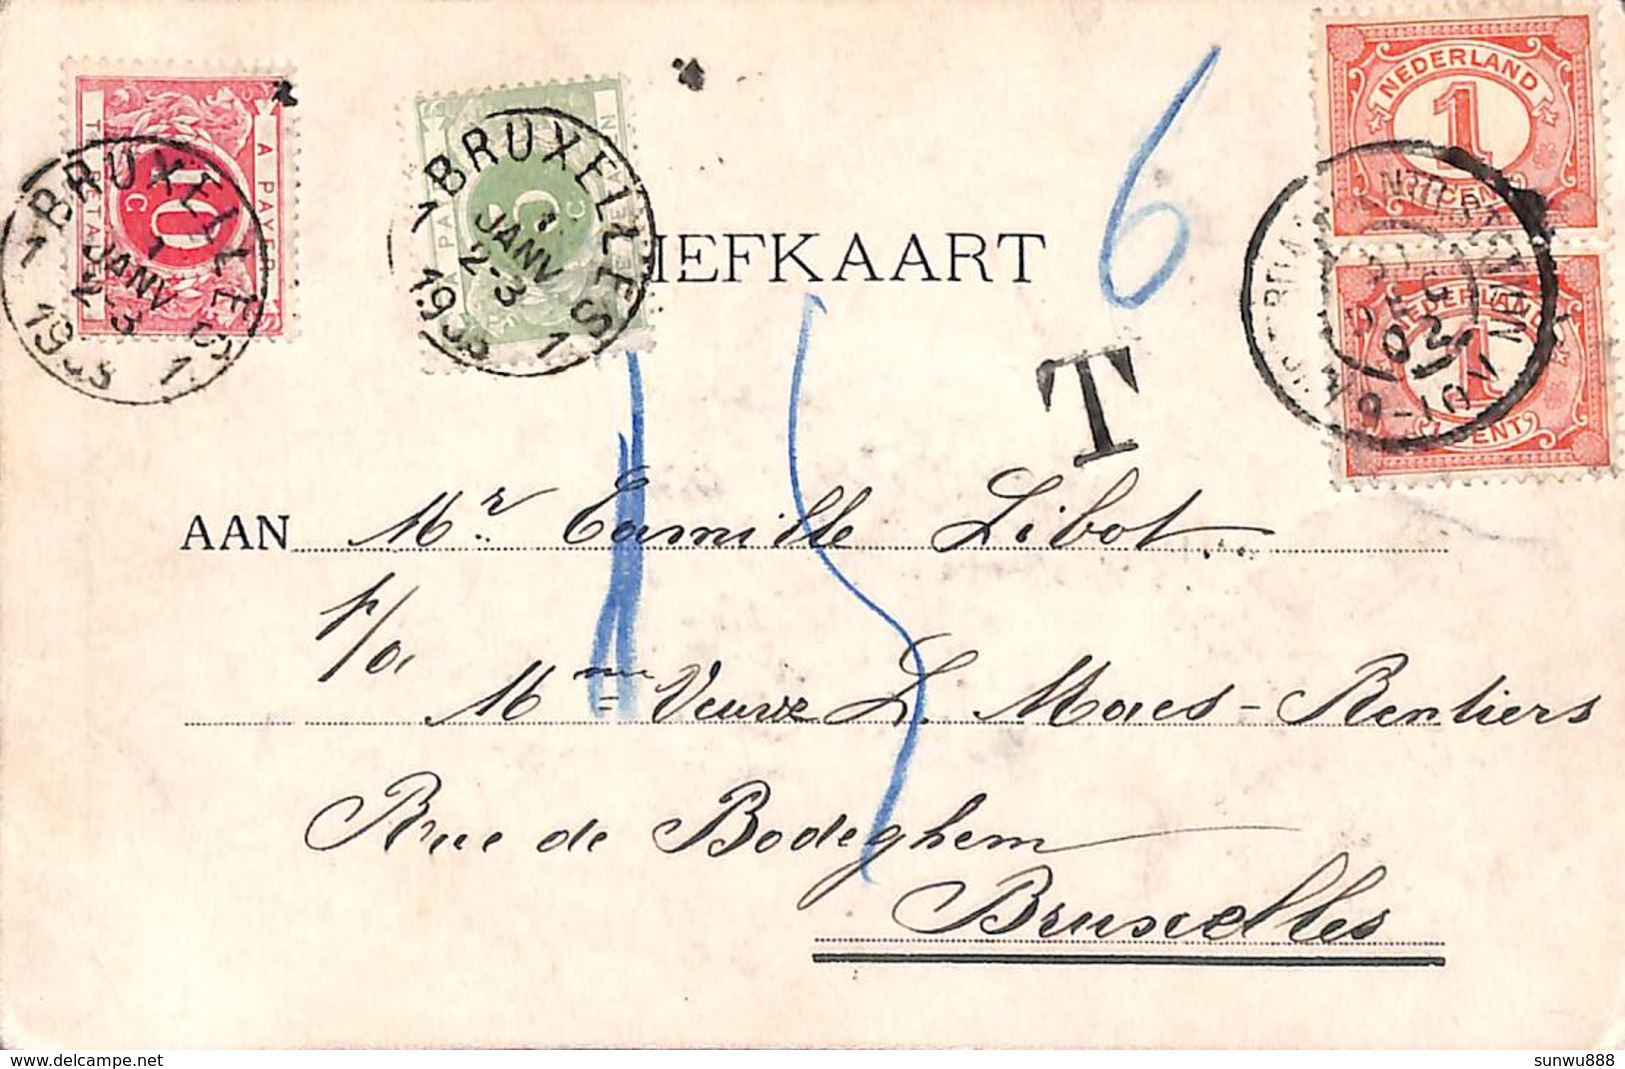 Amsterdam - Joden Breestraat (Uitg. A S Wins & Co, 1902 & 1903, Timbres Taxes) - Amsterdam